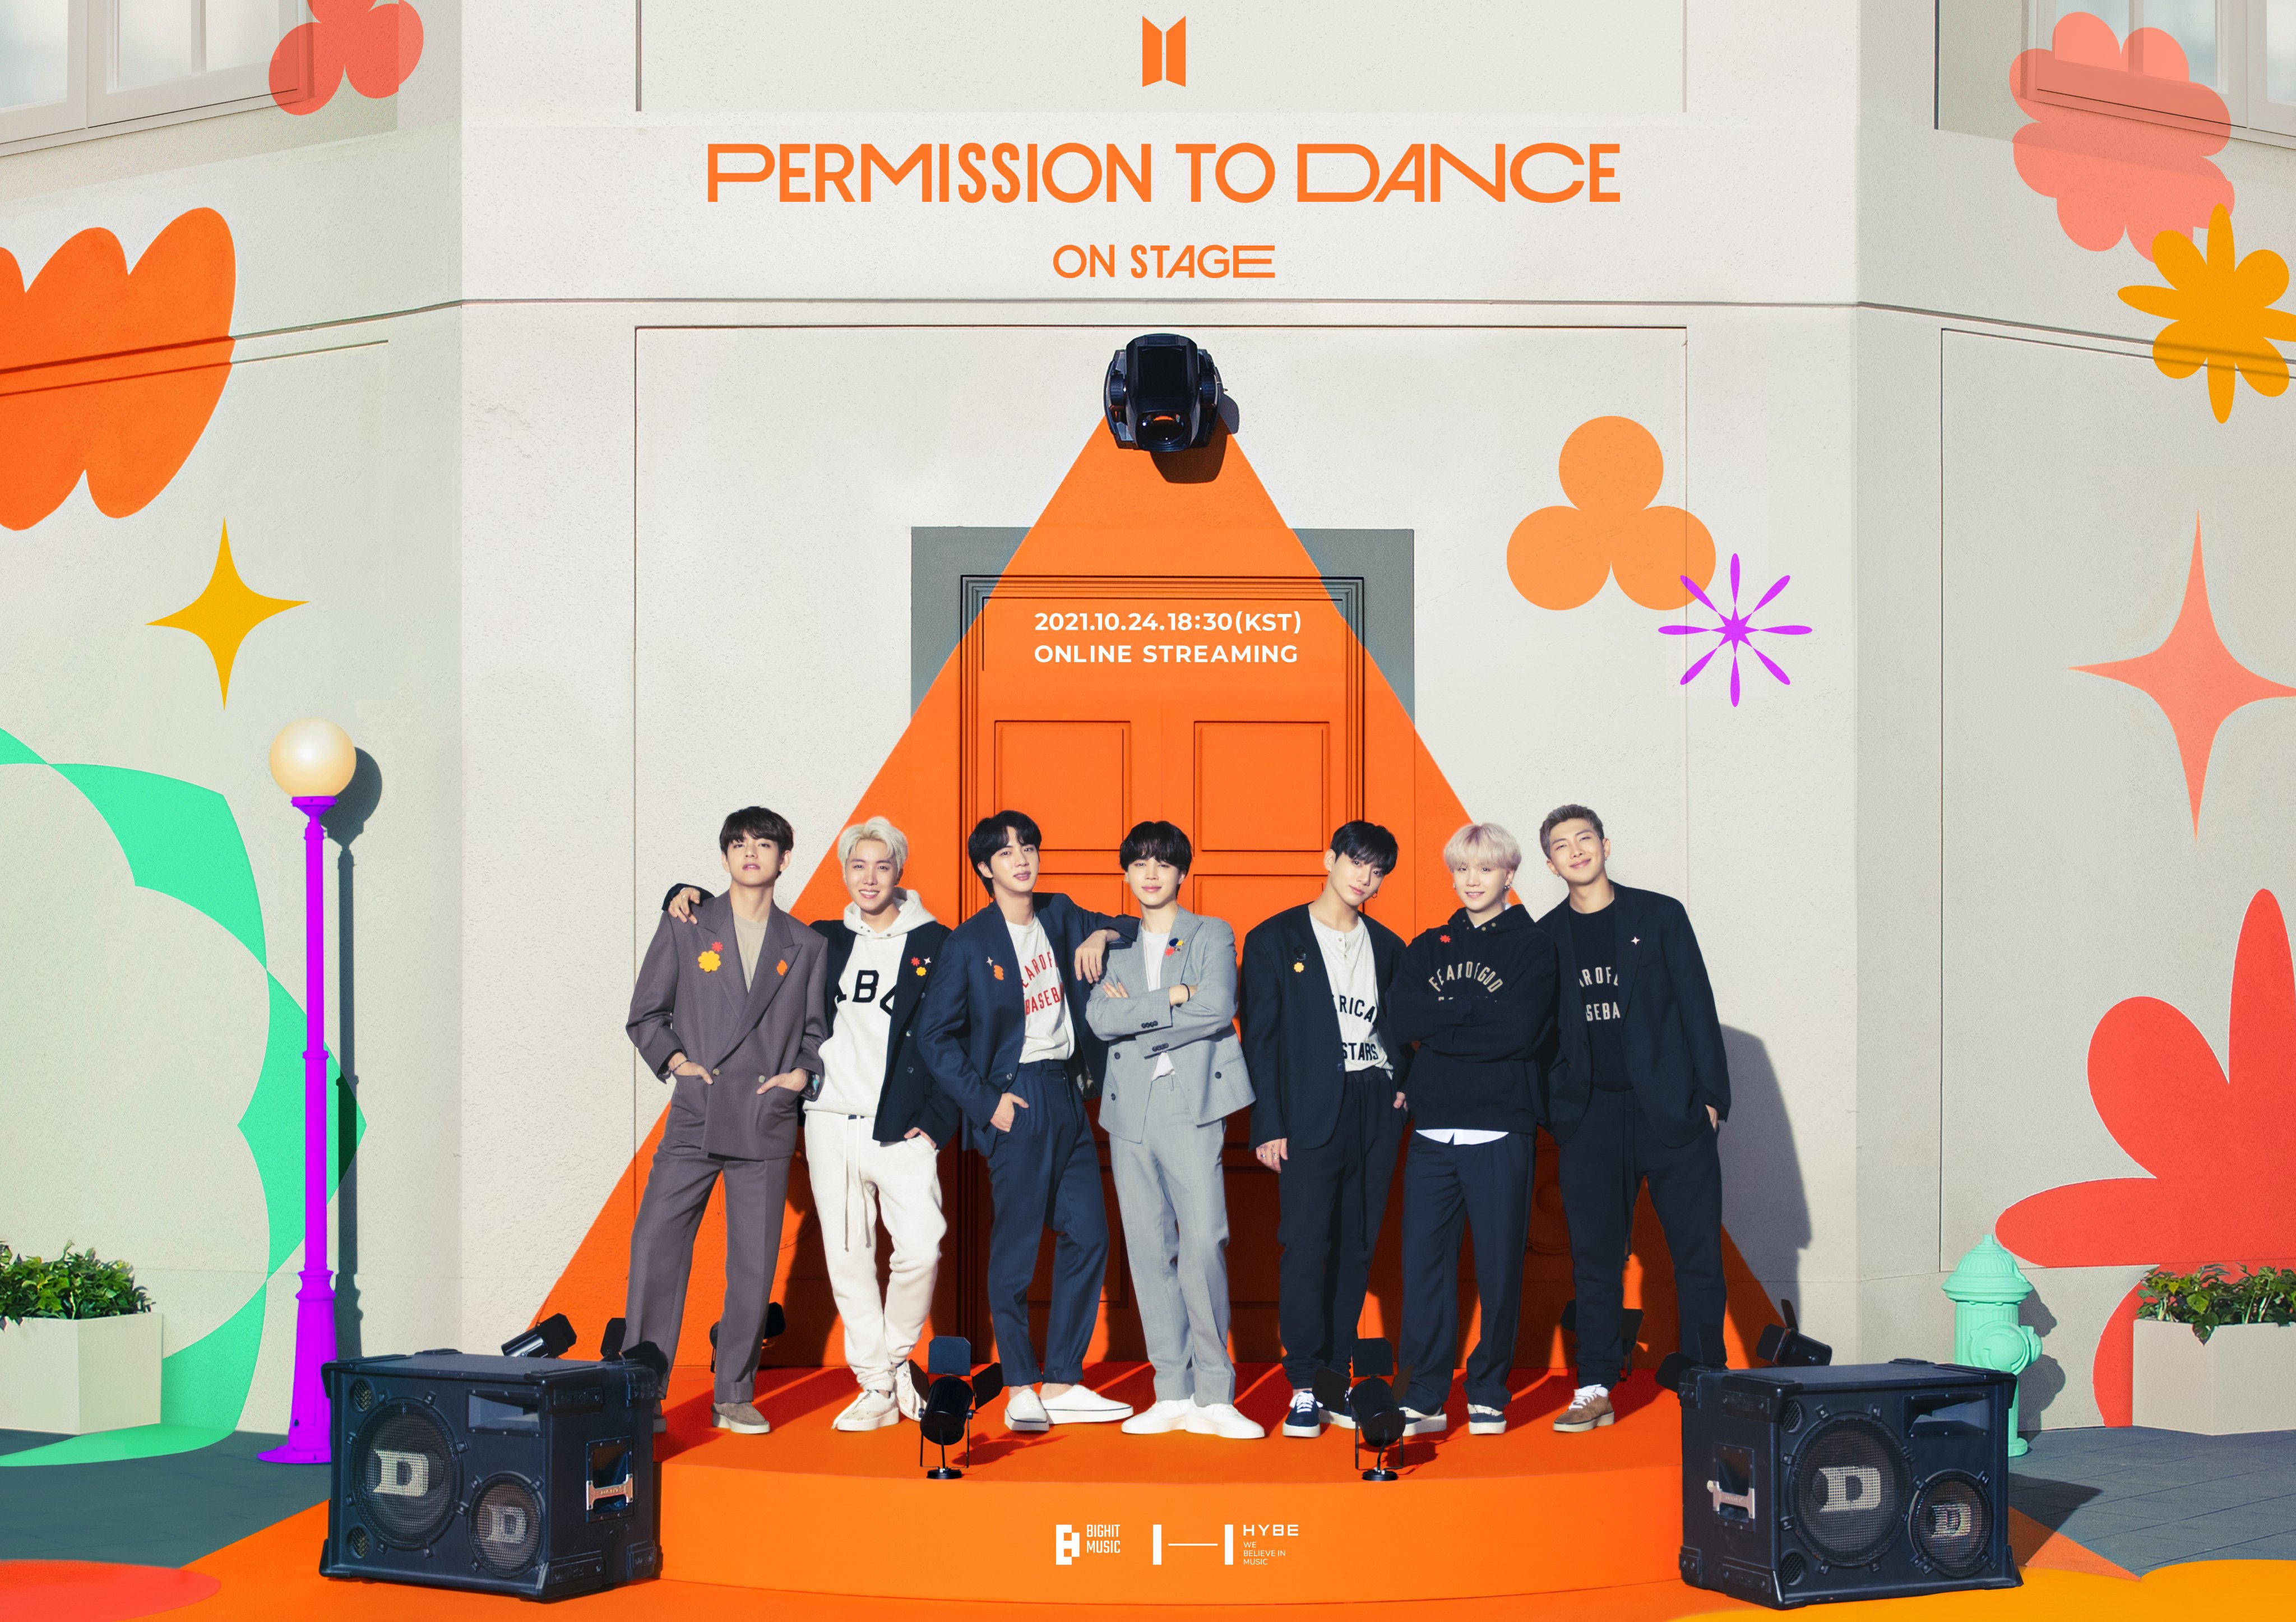 V, J-Hope, Jin, Jimin, Jungkook, Suga, and RM of BTS stand on an orange stage in front of speakers